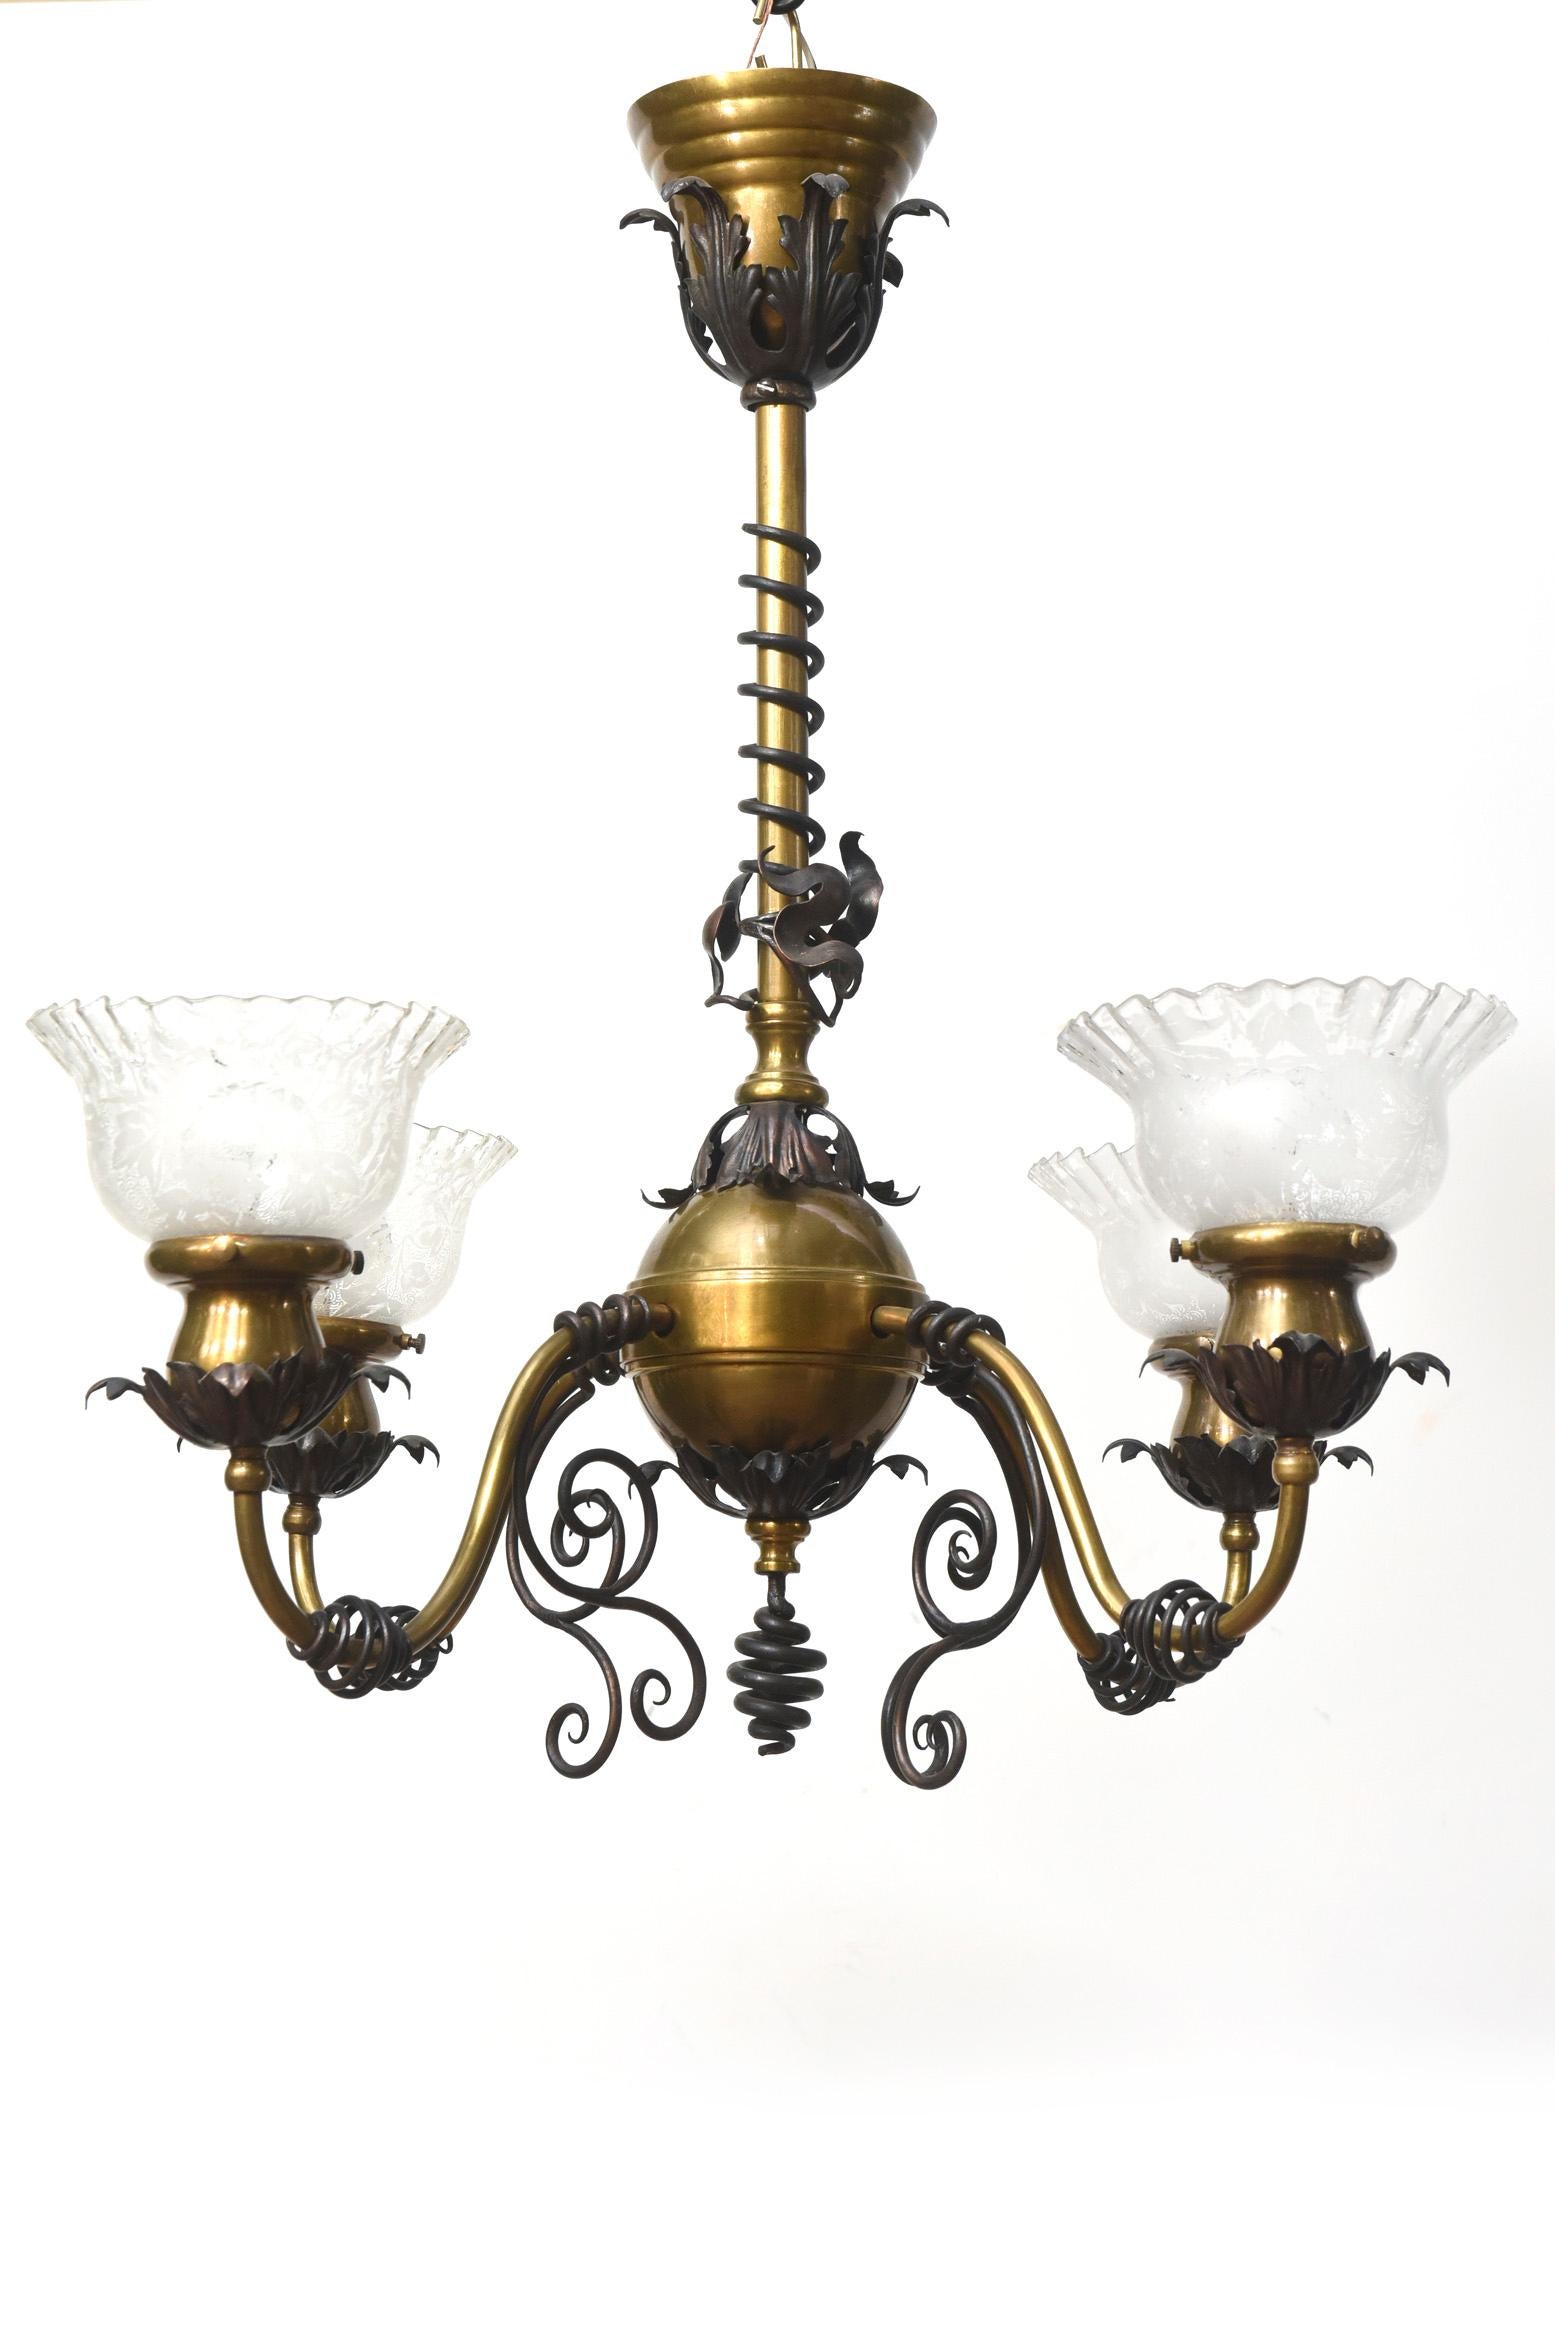 Four Light Brass and Wrought Iron Early Electric Fixture For Sale 3